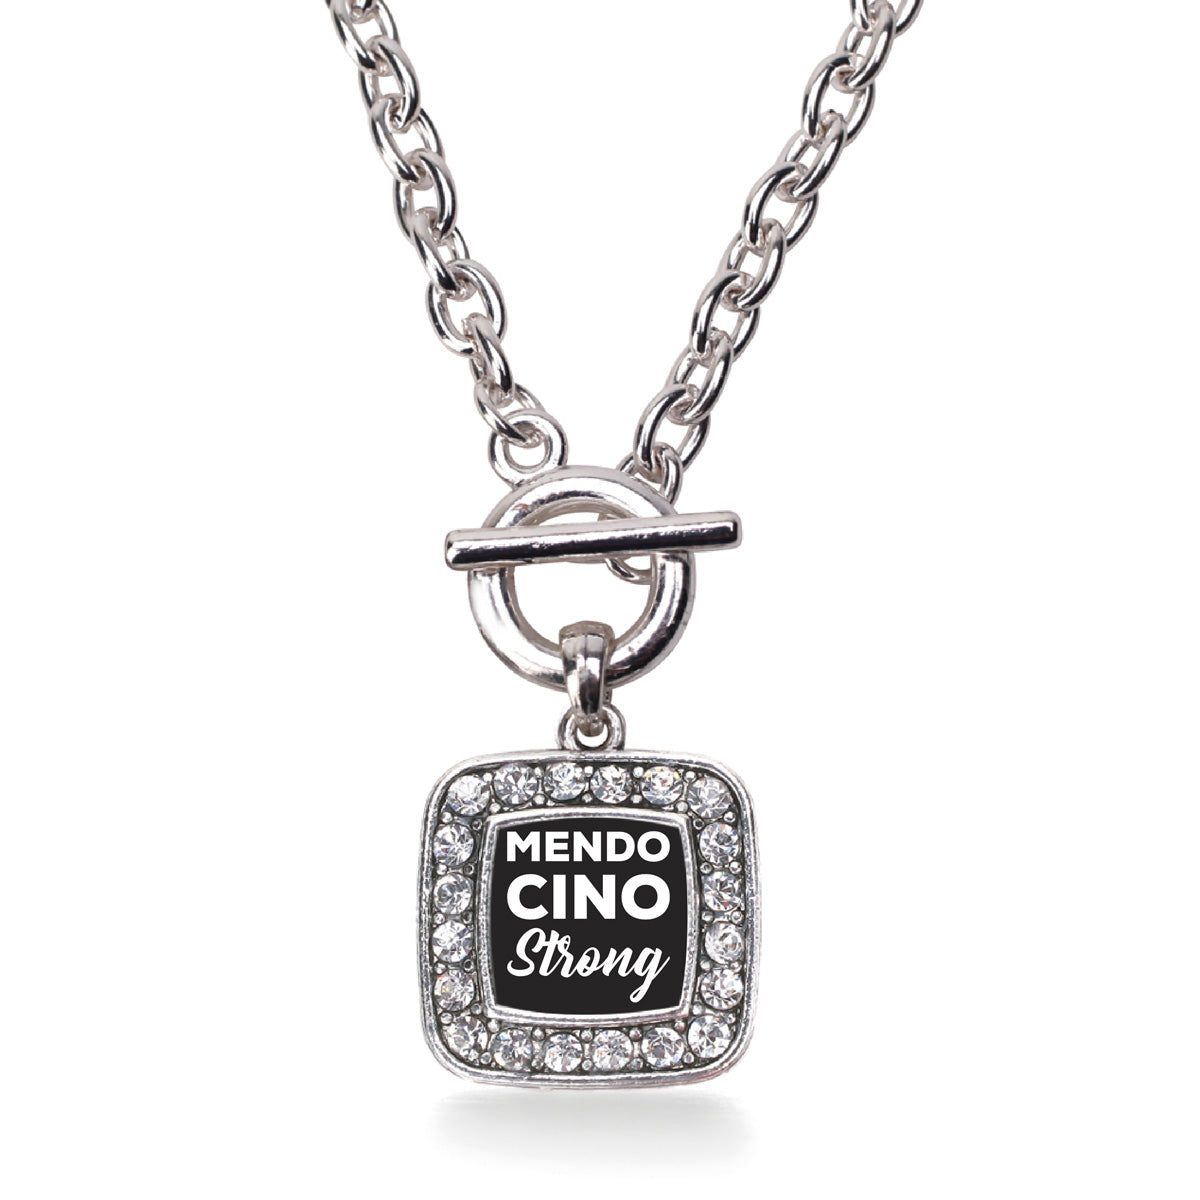 Silver Mendocino Strong Square Charm Toggle Necklace